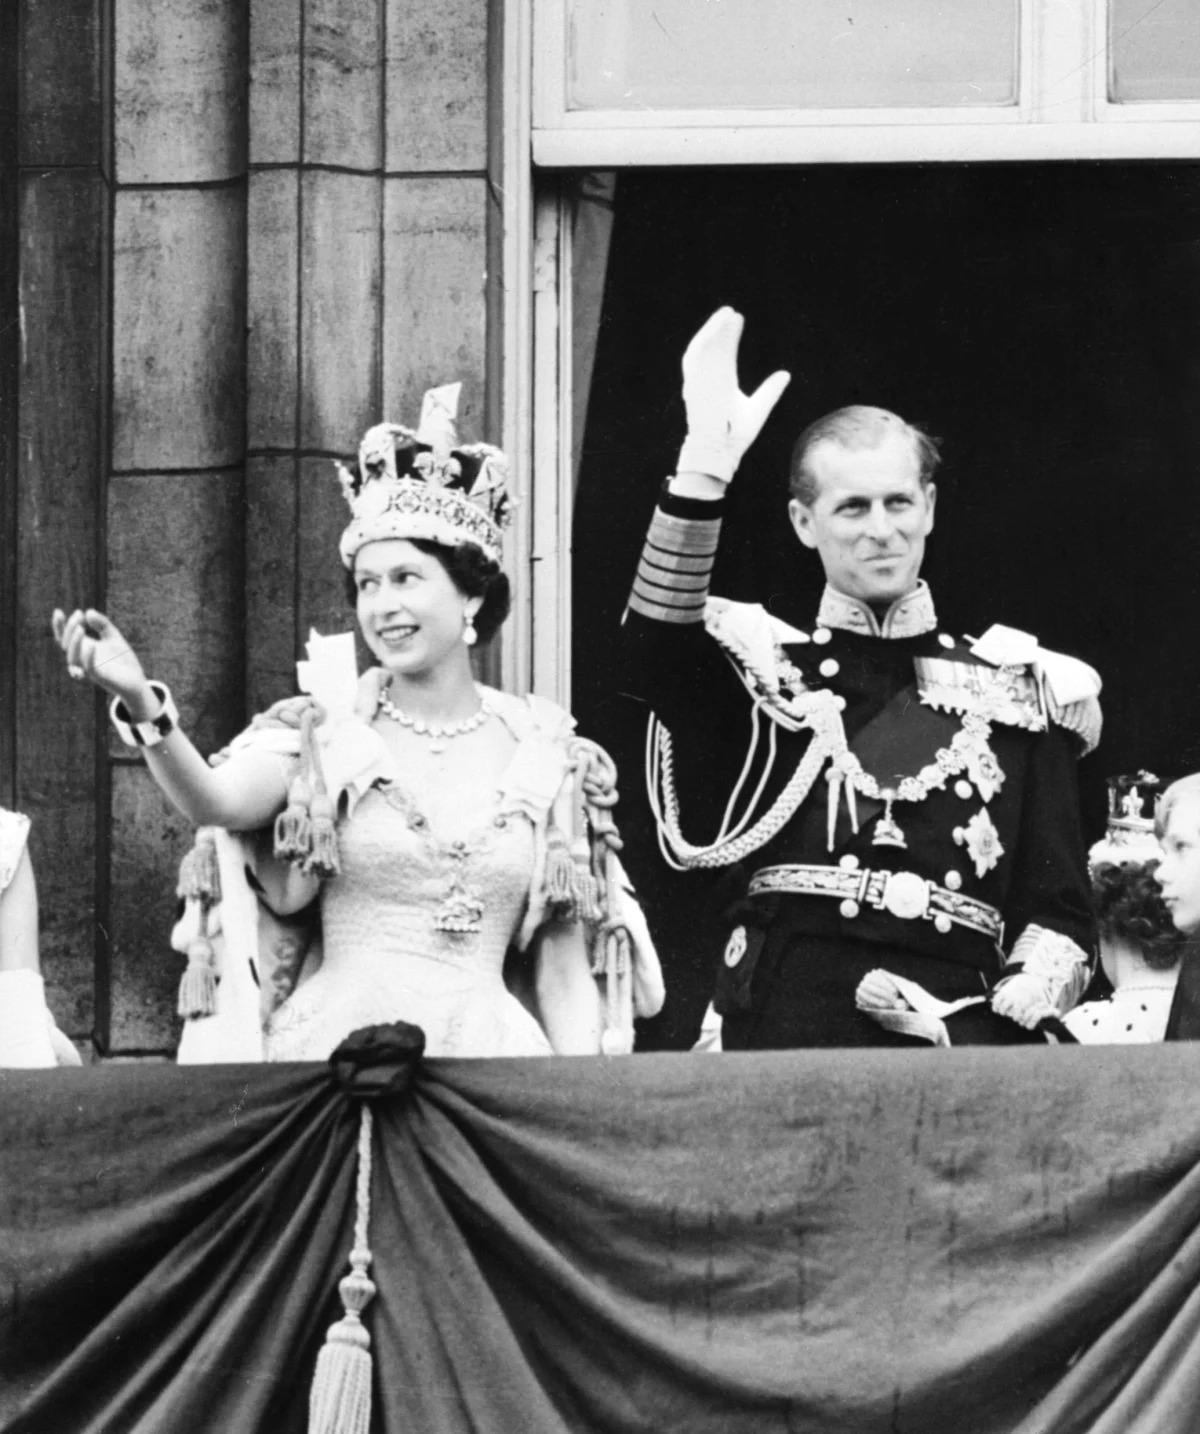 After Queen Elizabeth II's death, Britain is now facing the unthinkable